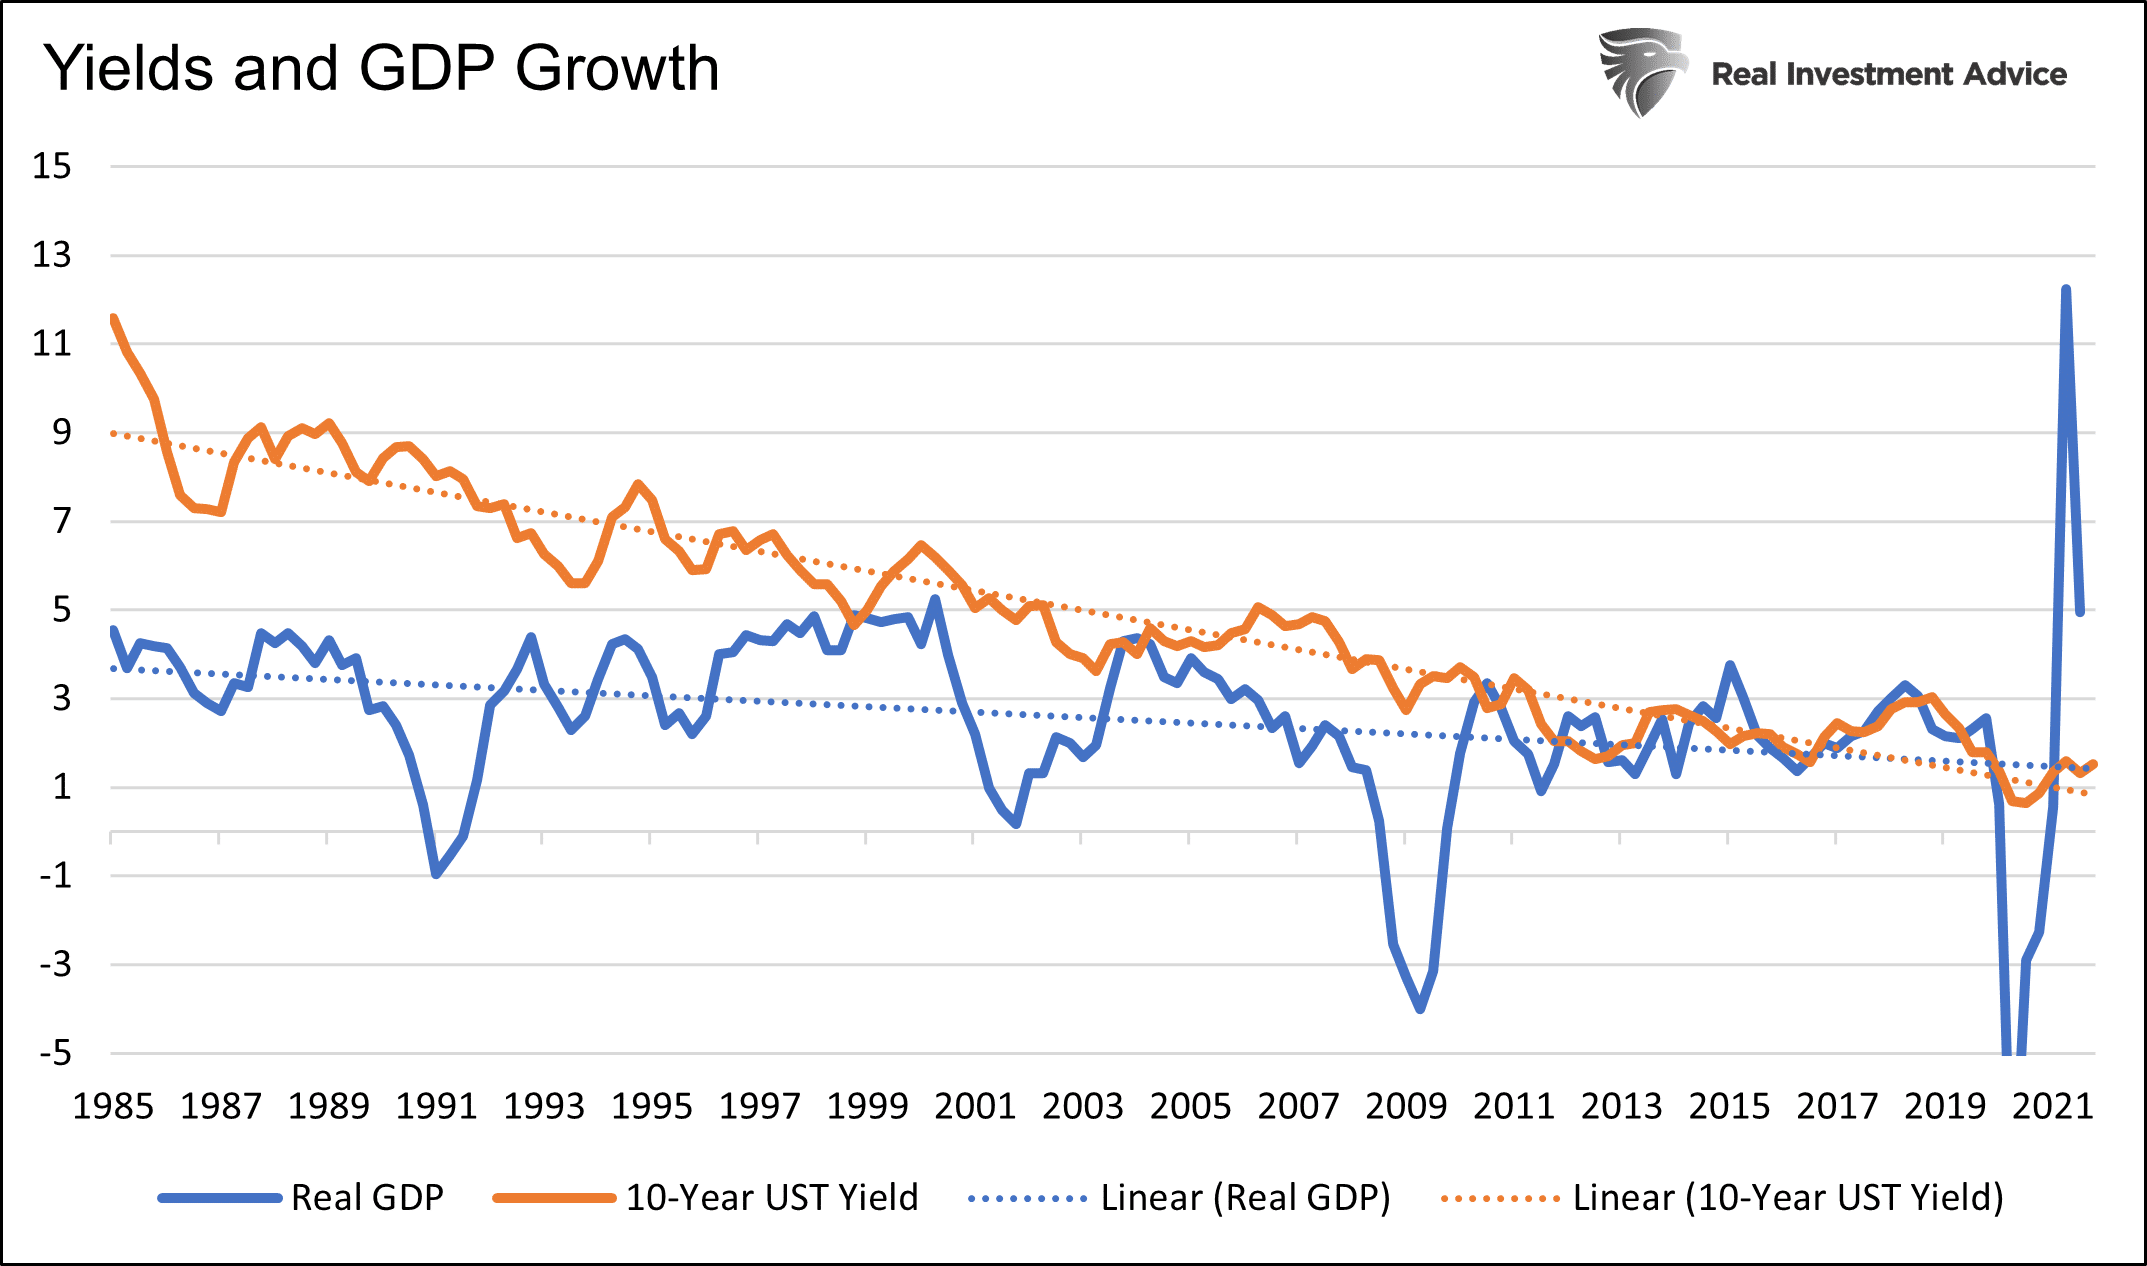 Yields & GDP Growth